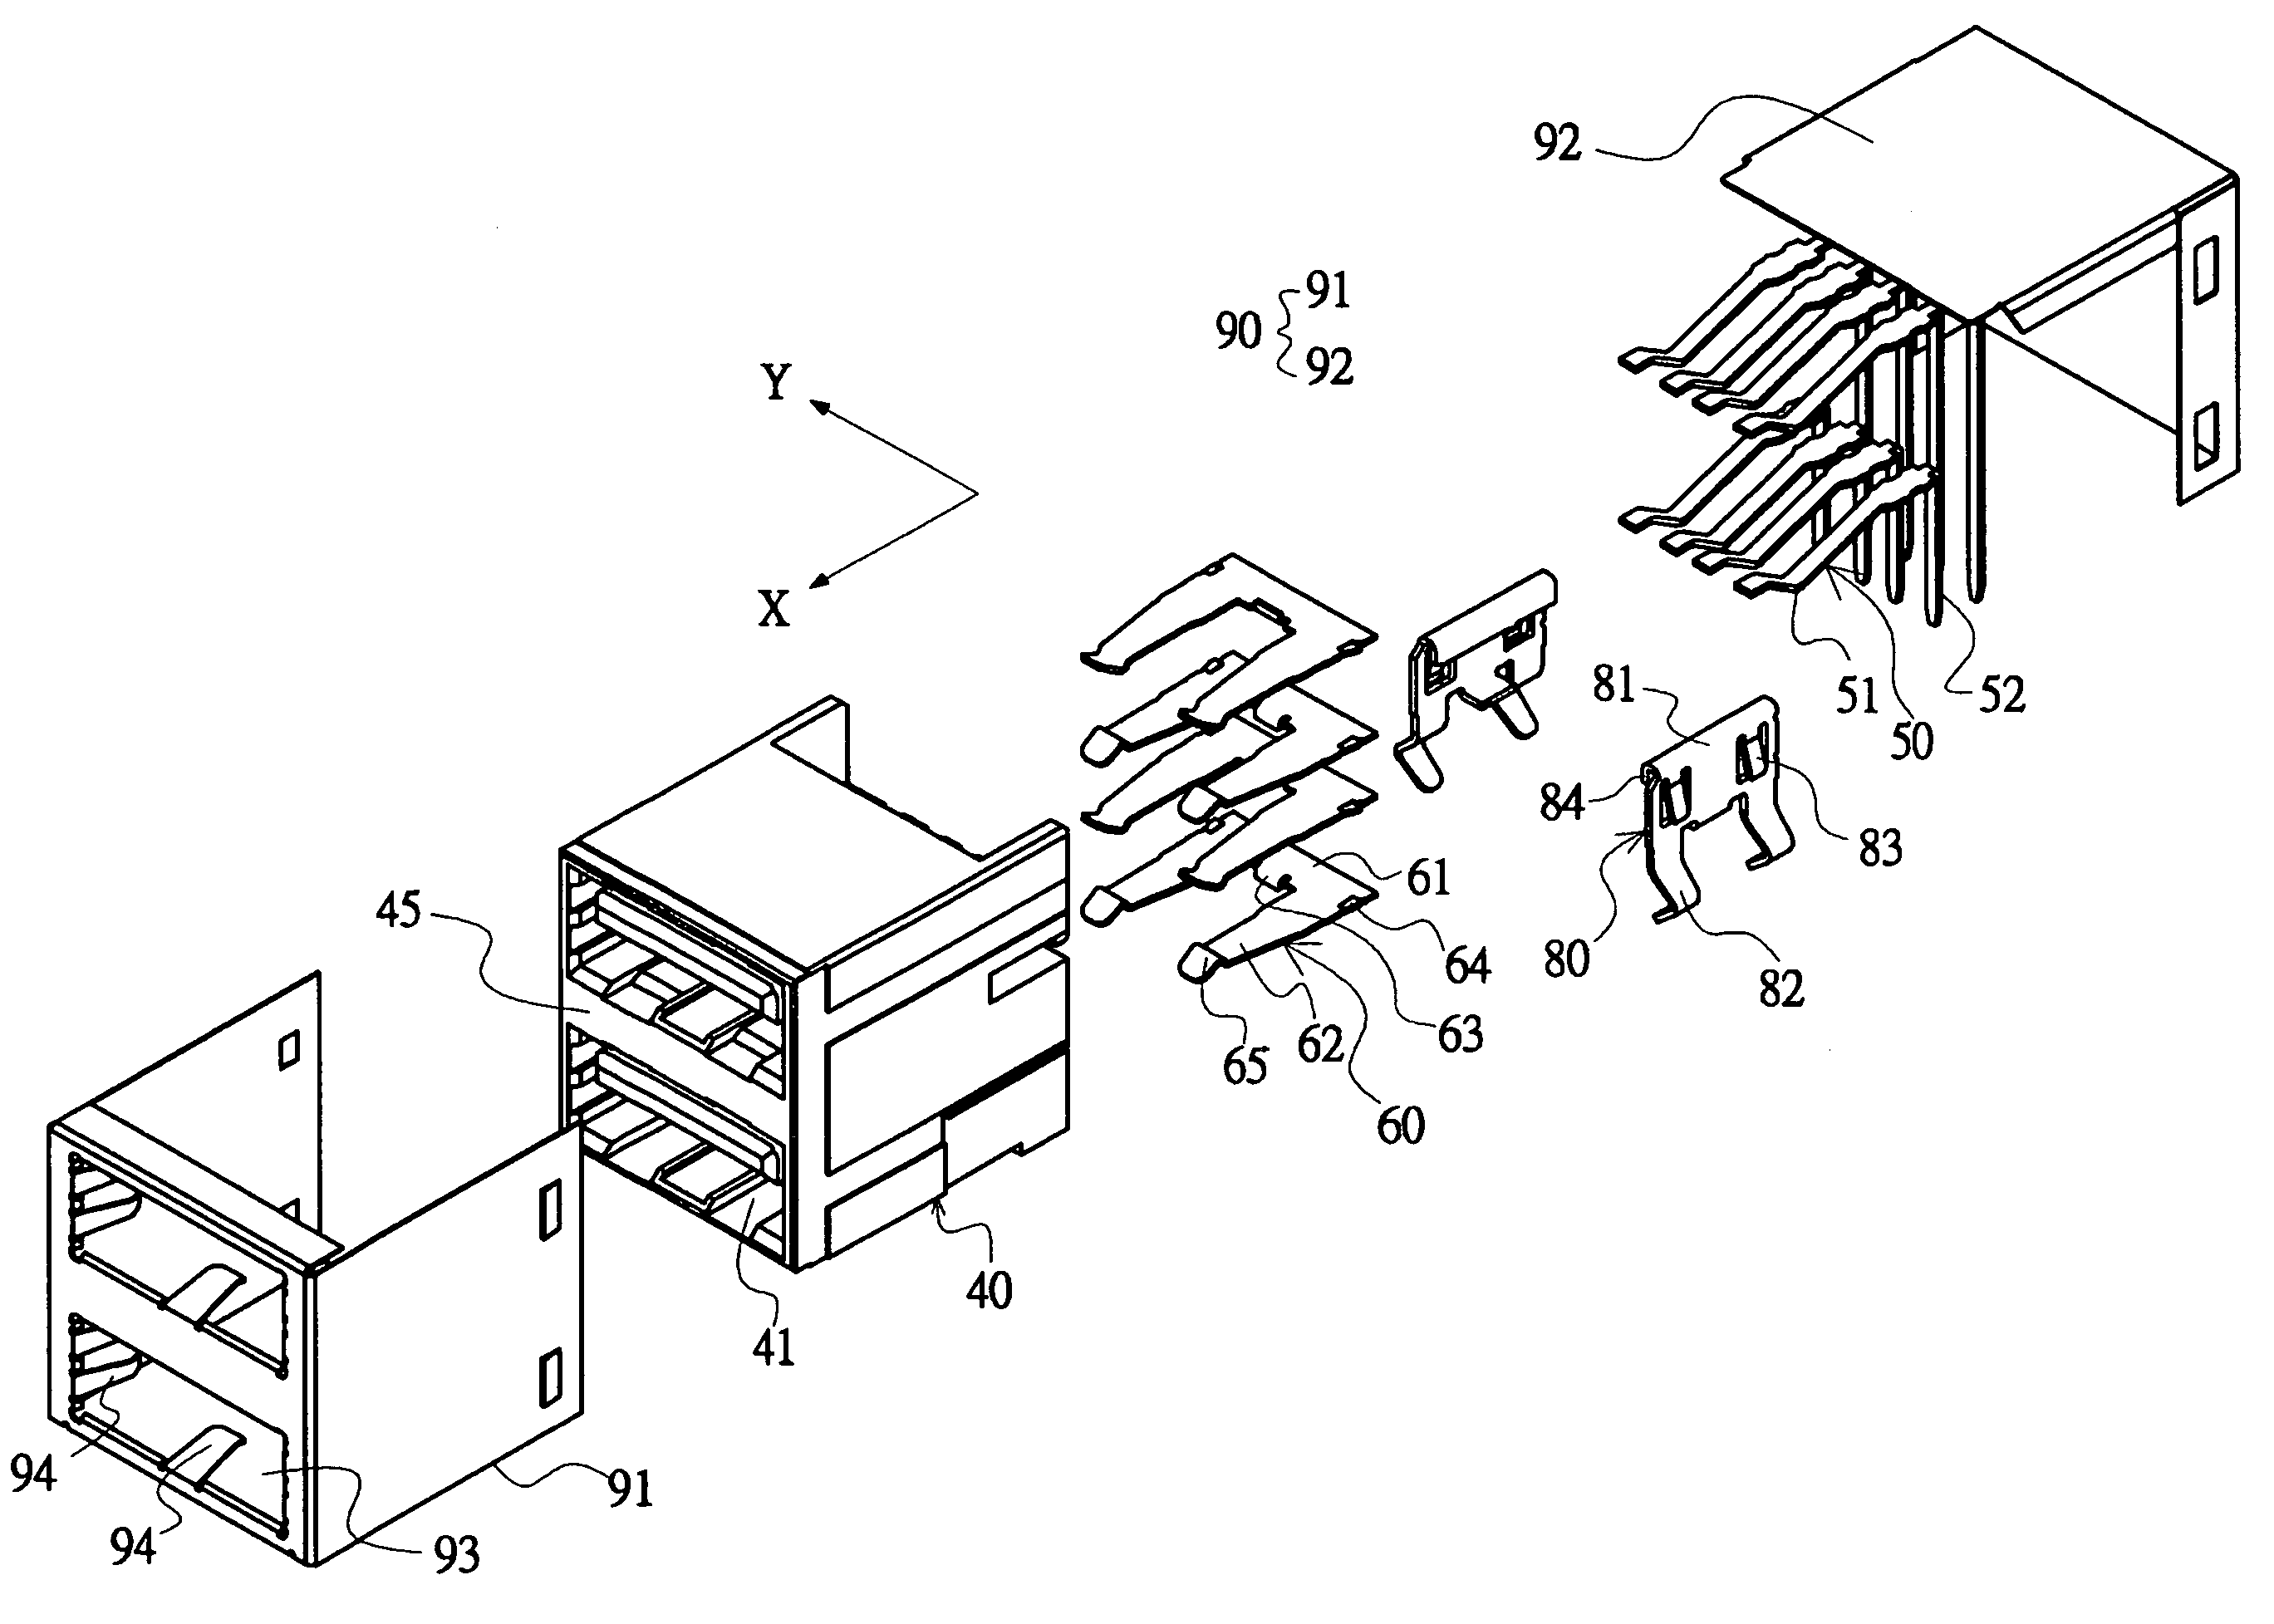 Electrical connector having a fastening assembly and a metal housing that pertain to different parts